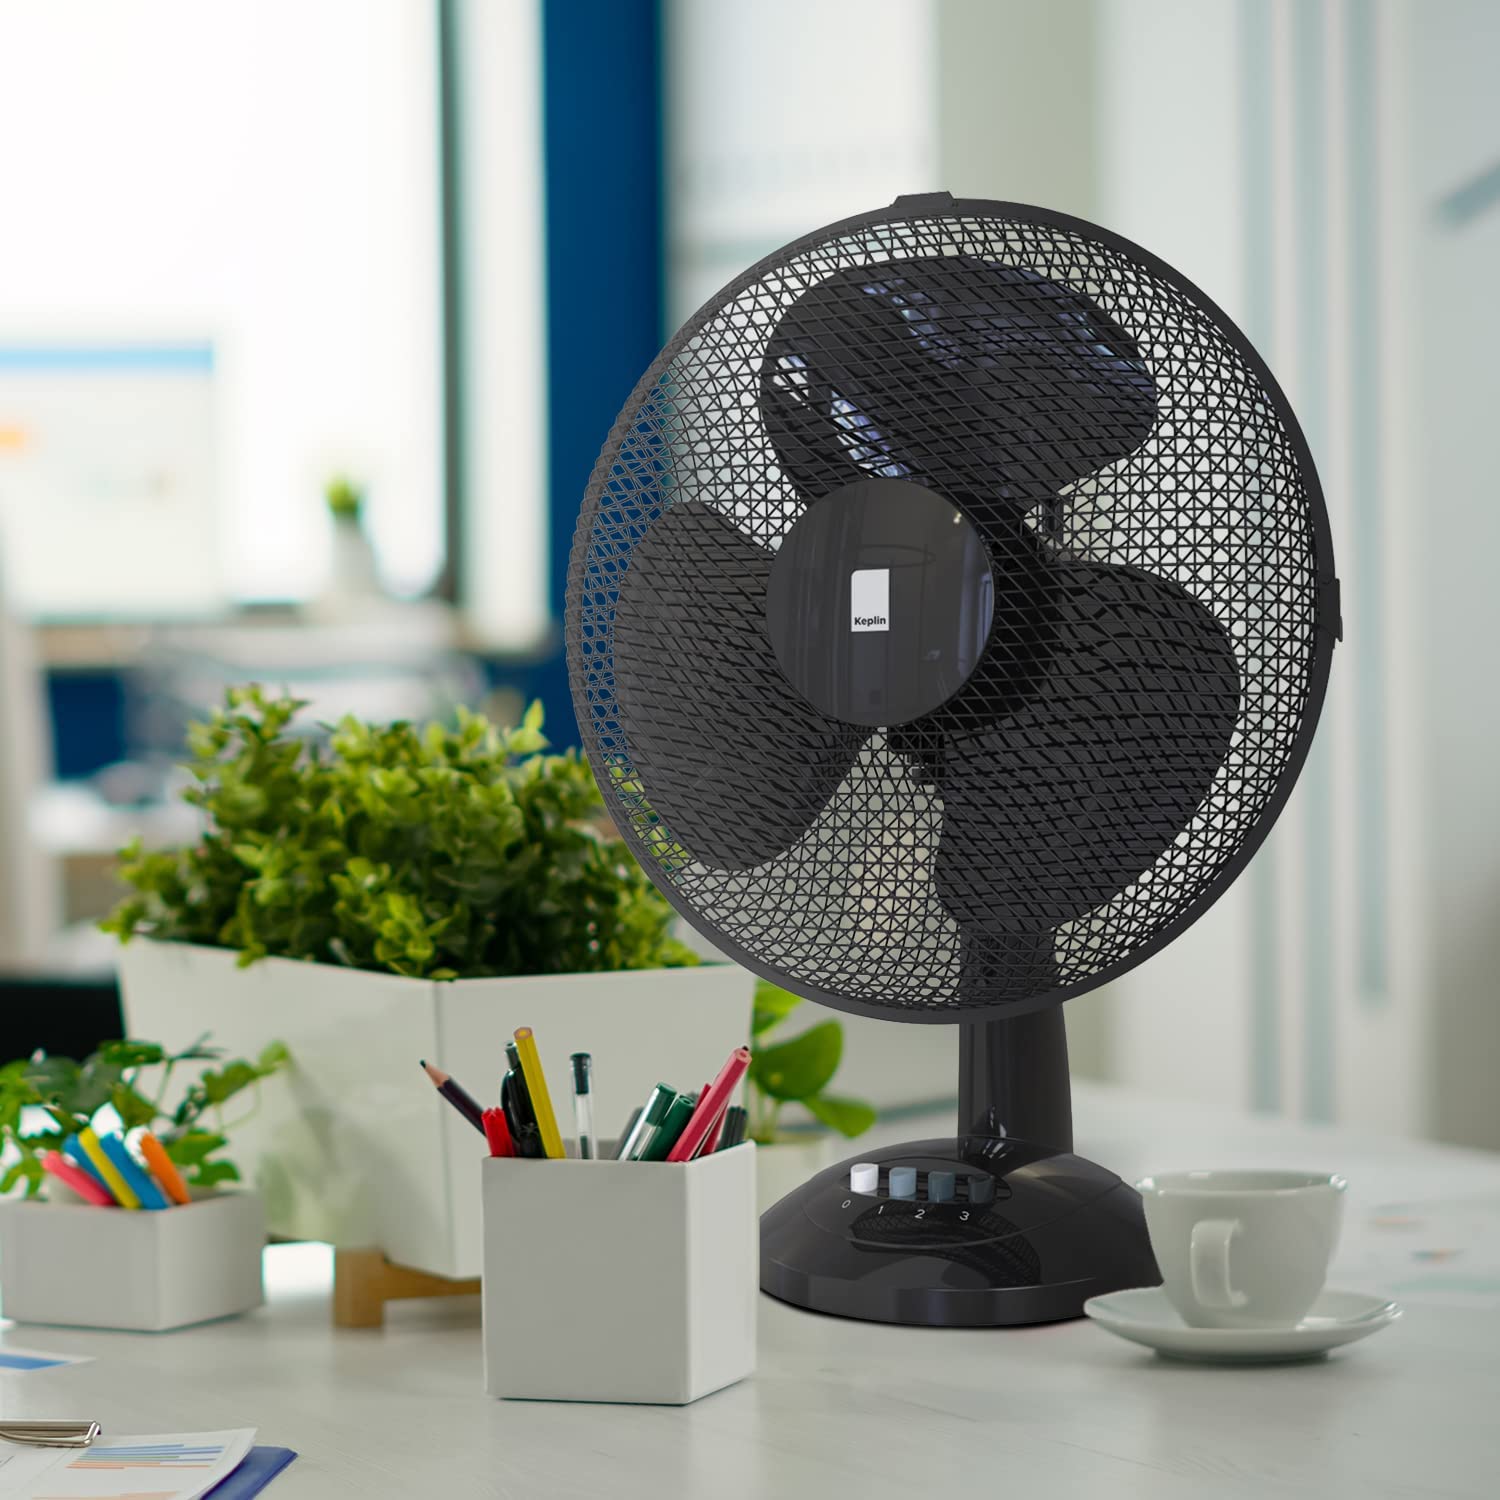 KEPLIN 12 Inch, Lightweight, Portable Desk Fan 3 Speed Settings, Wide-Angled Oscillation, Powerful Airflow, Quiet Operation, Adjustable Tilt Head, Table Fan, Ideal for Bedroom and Office Use (Black)